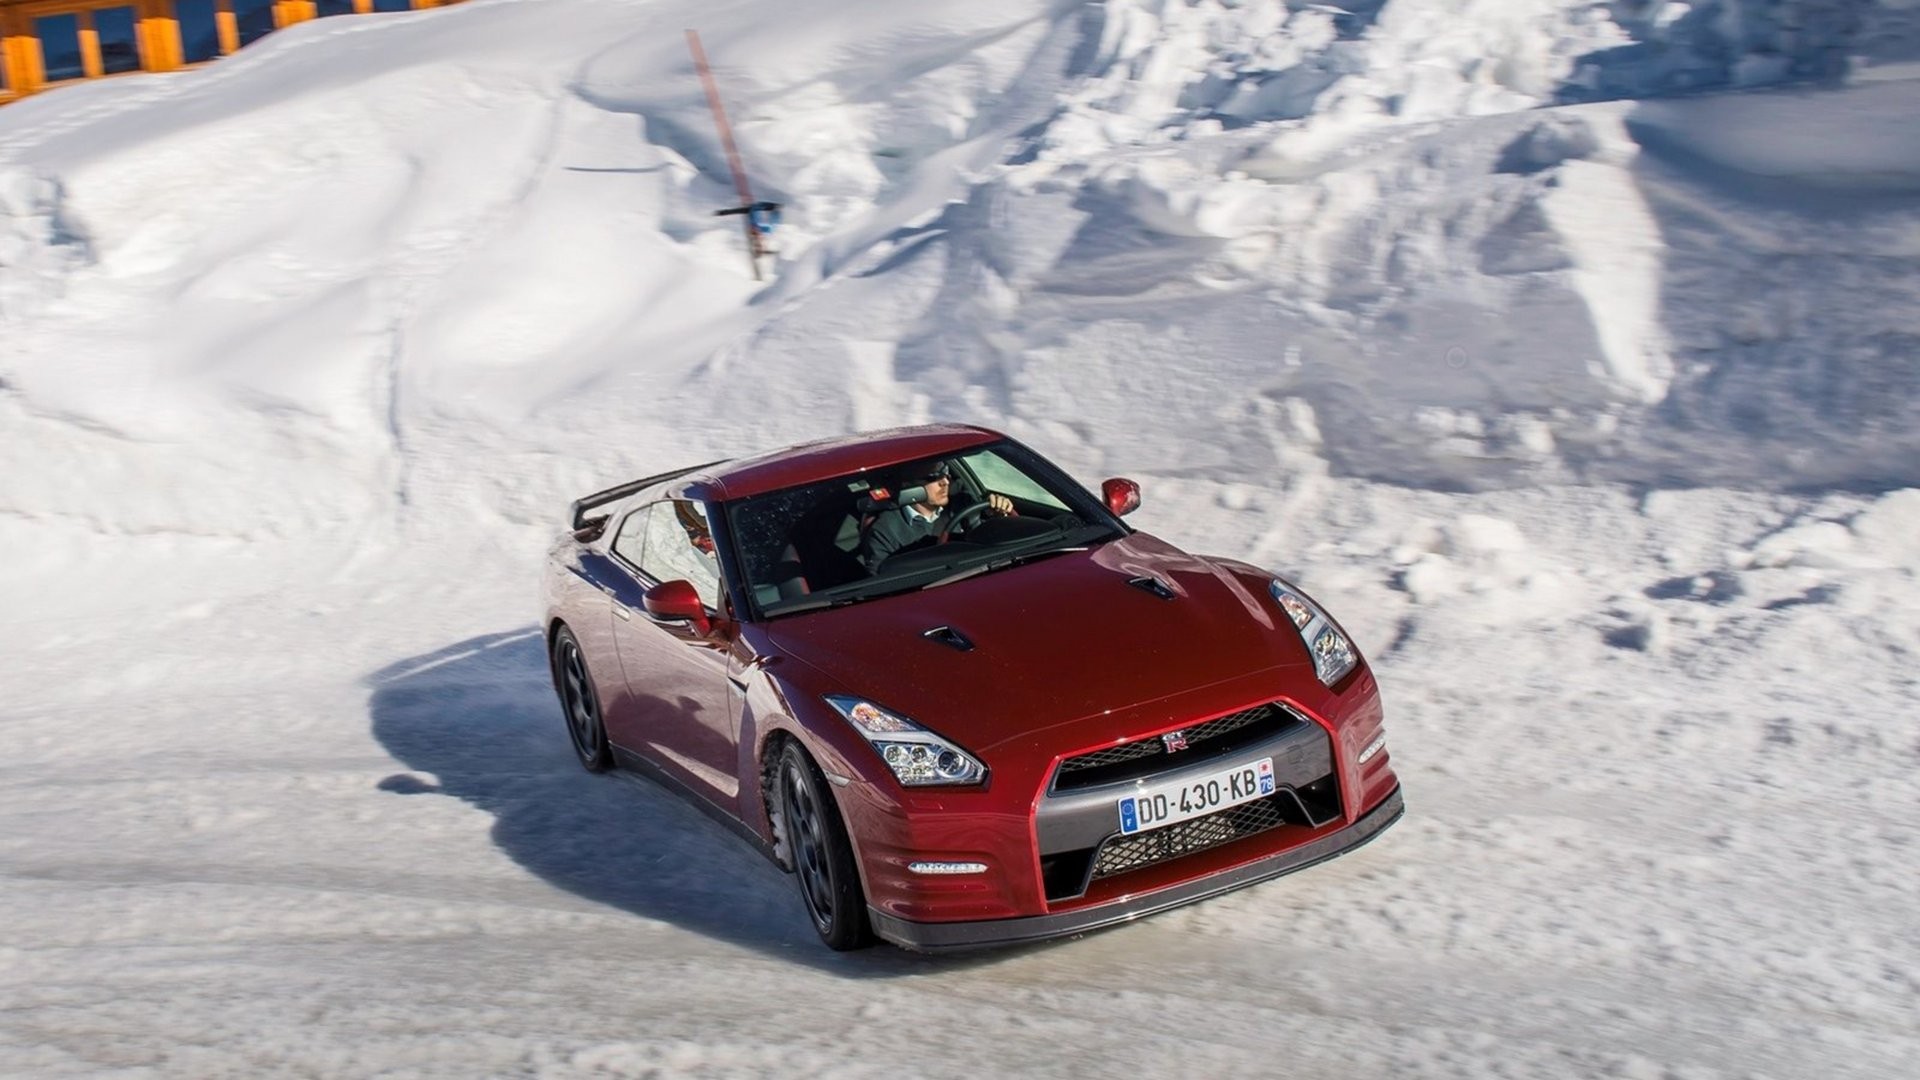 General 1920x1080 Nissan Nissan GT-R winter car vehicle red cars snow numbers